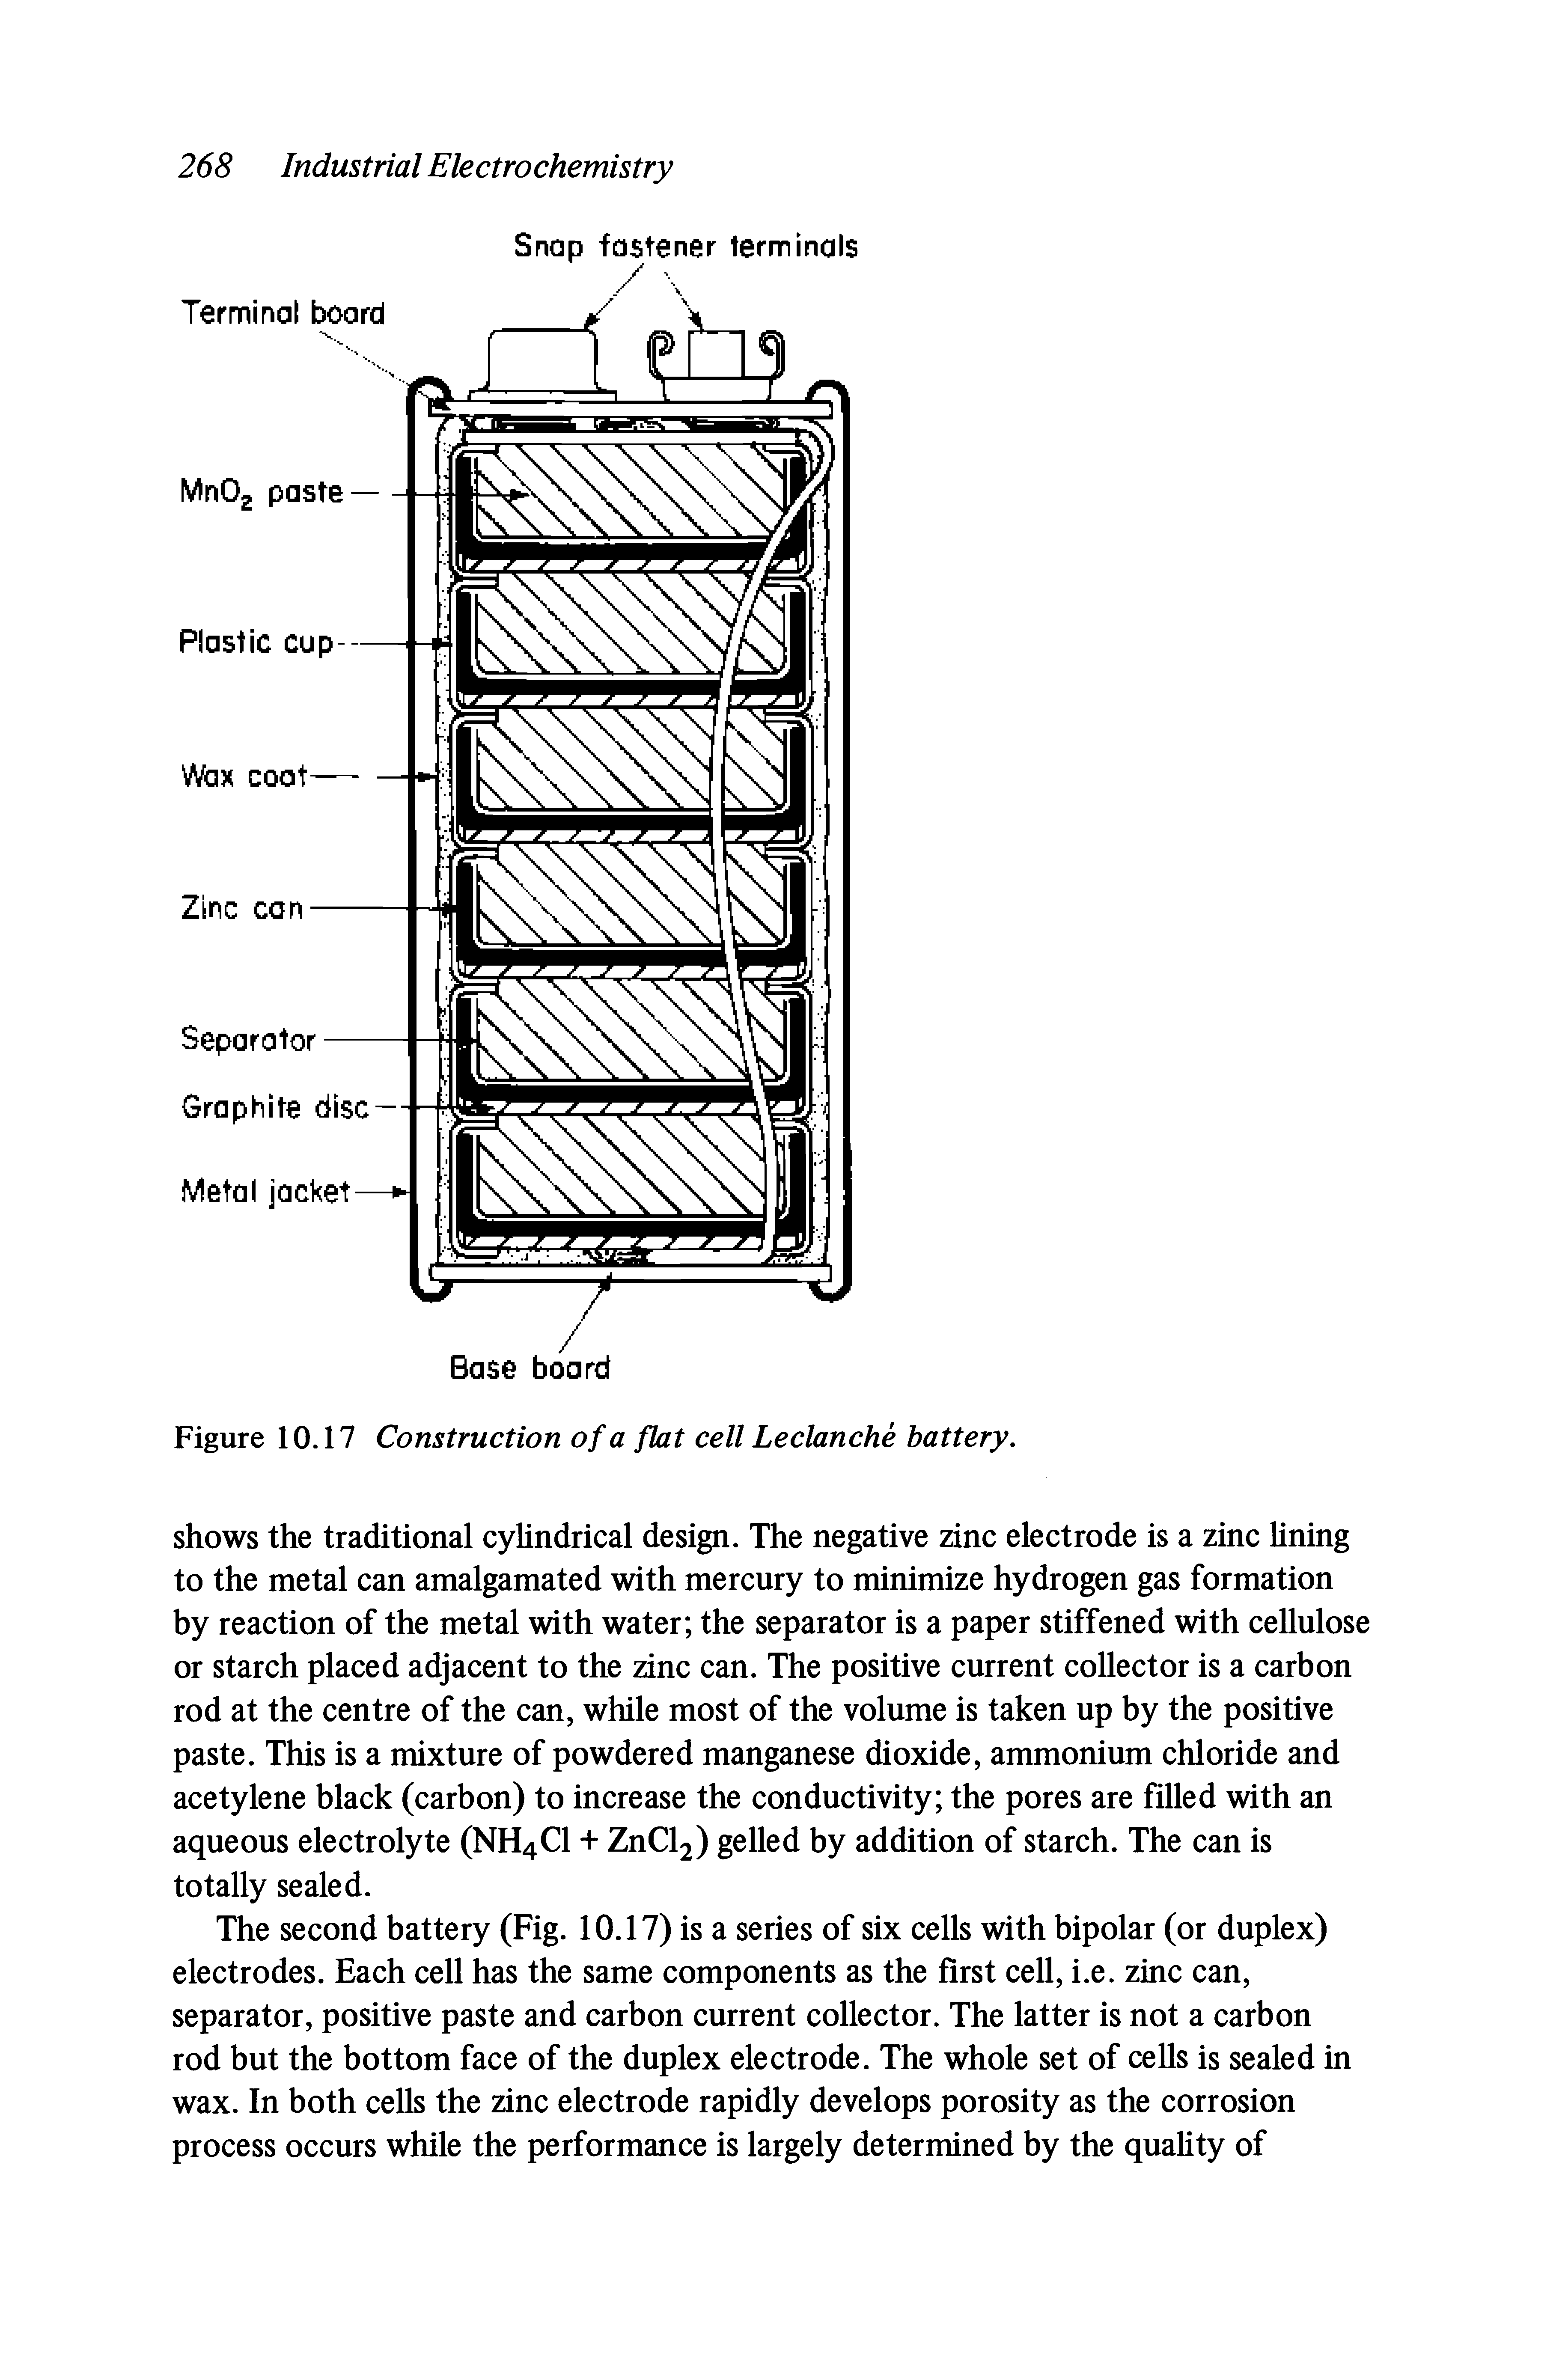 Figure 10.17 Construction of a flat cell Leclanche battery.